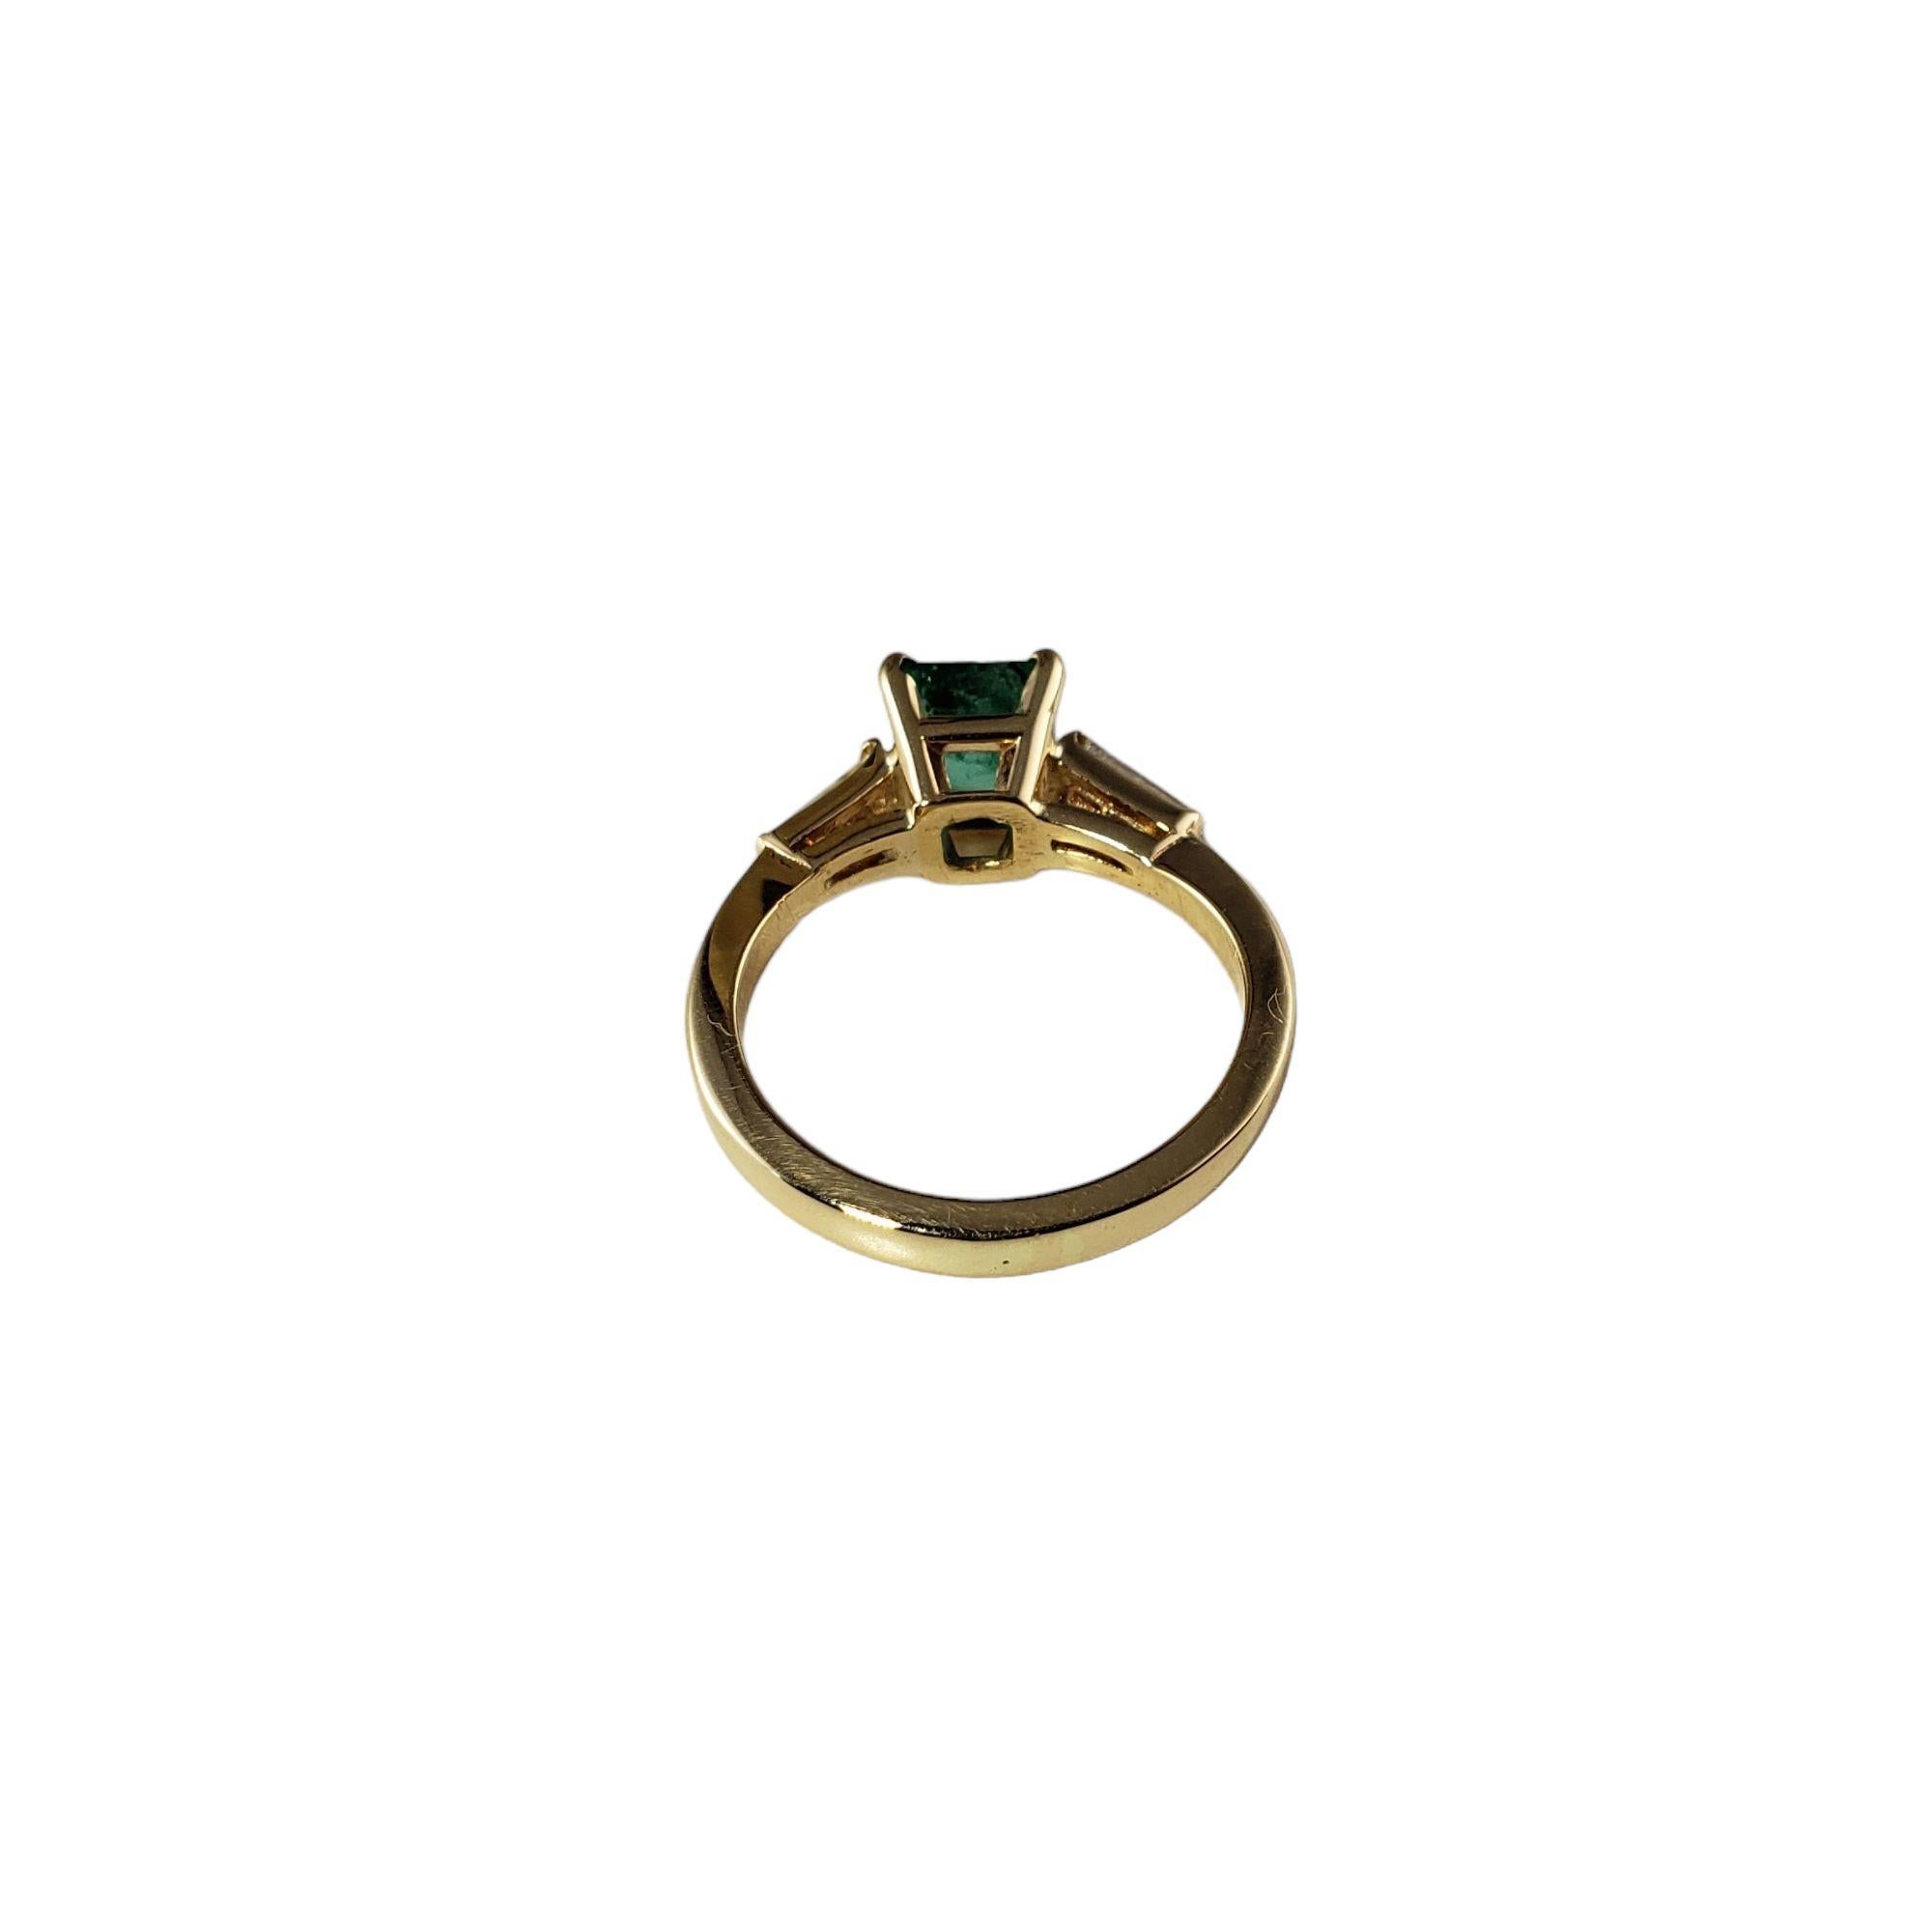  14 Karat Yellow Gold Emerald and Diamond Ring Size 6 #14334 For Sale 4